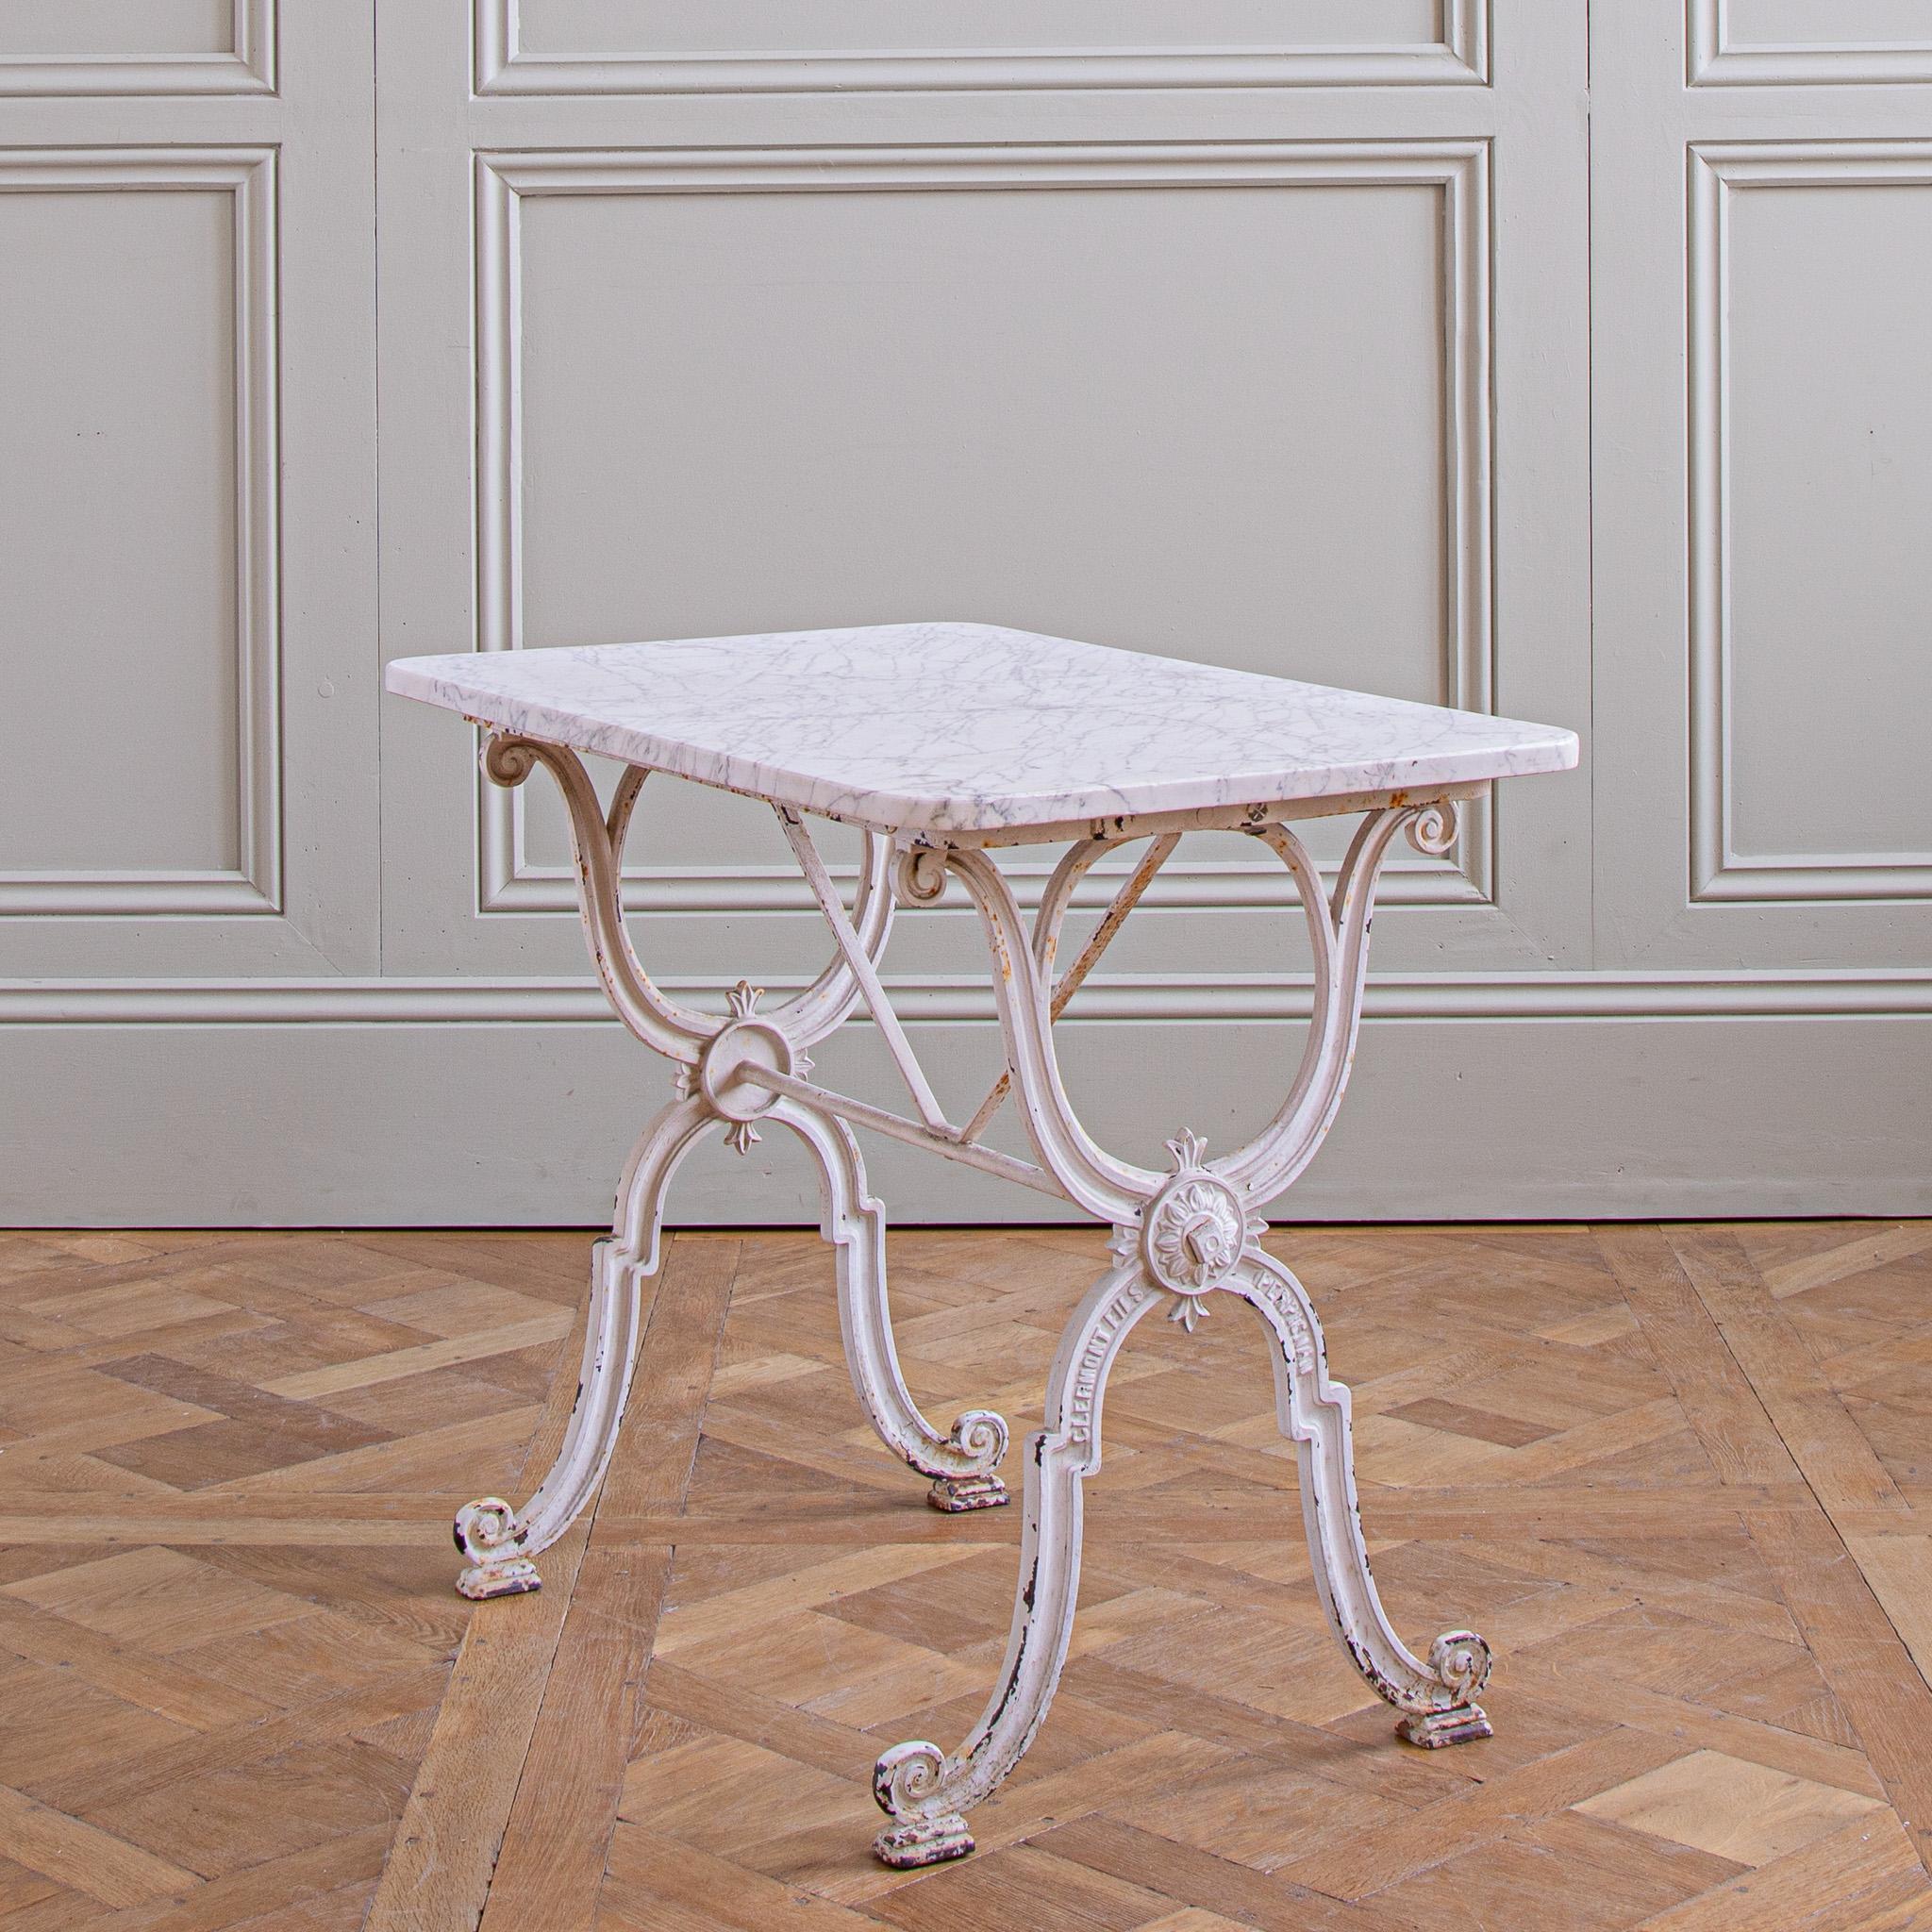 French Antique Iron & Marble Bistro / Garden Table In White By Clermont Fils In Good Condition For Sale In London, Park Royal